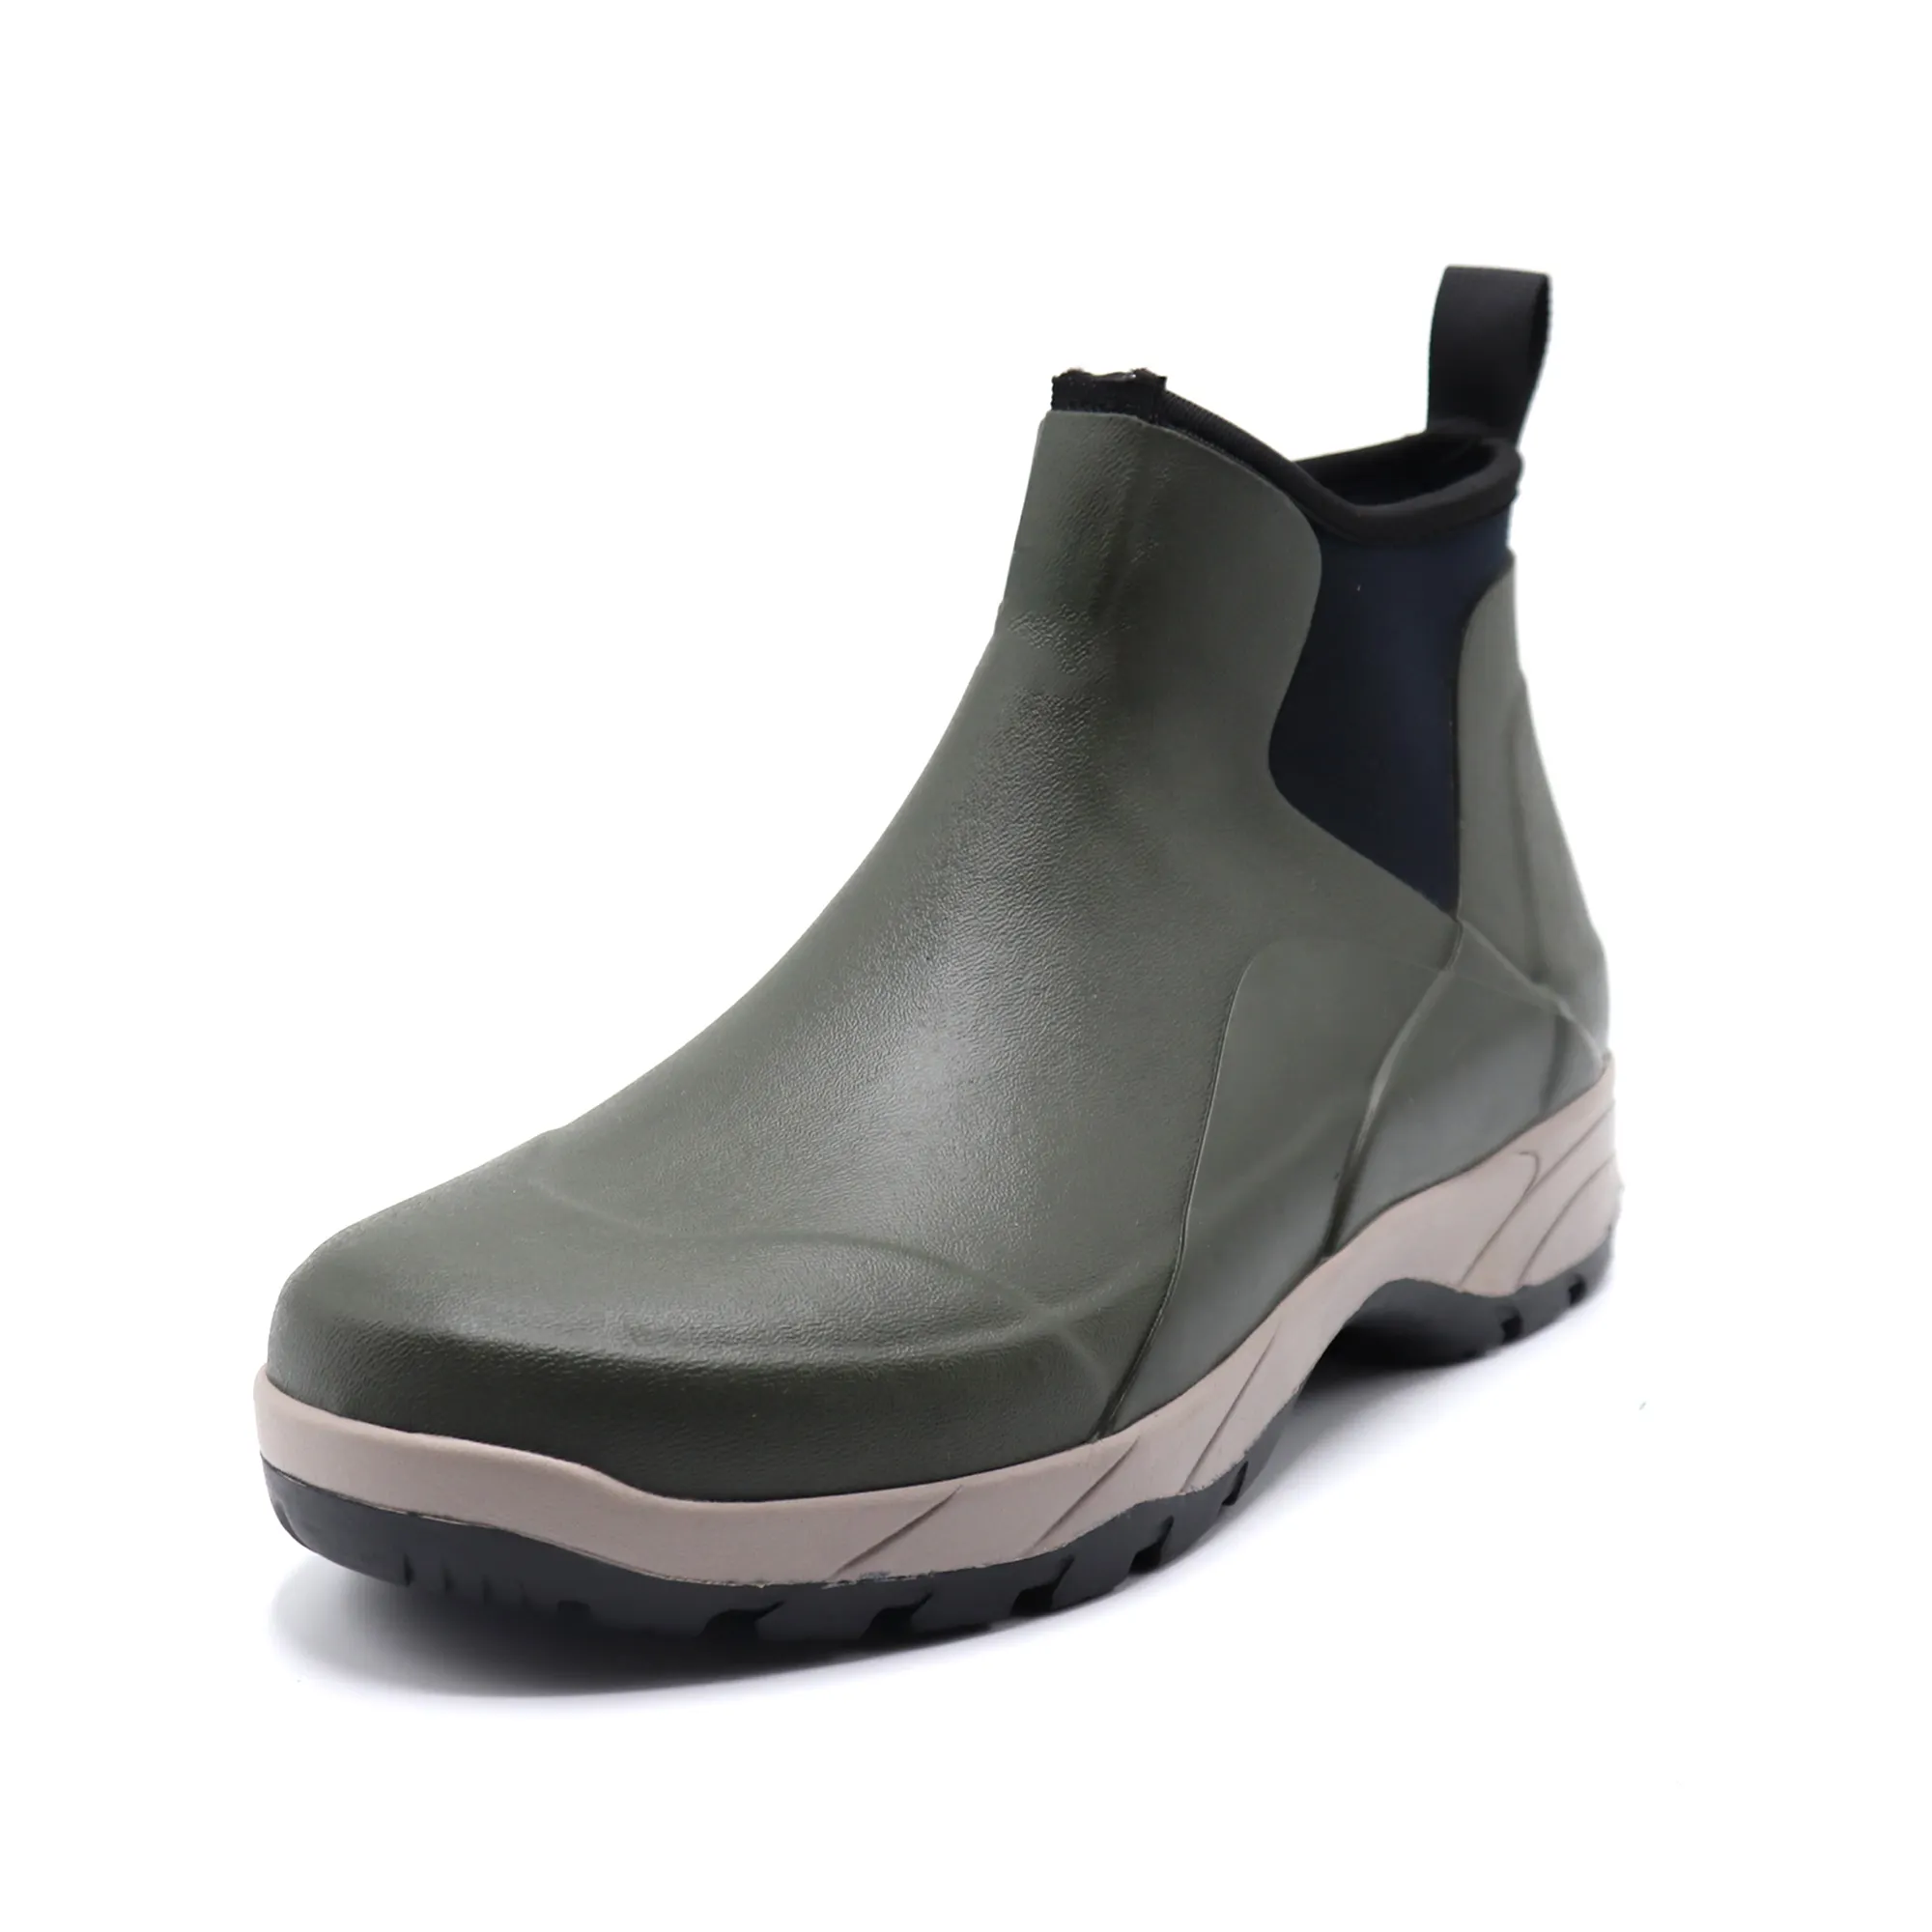 High quality slip-on leather boots army green waterproof shoes short rain shoes walking shoes